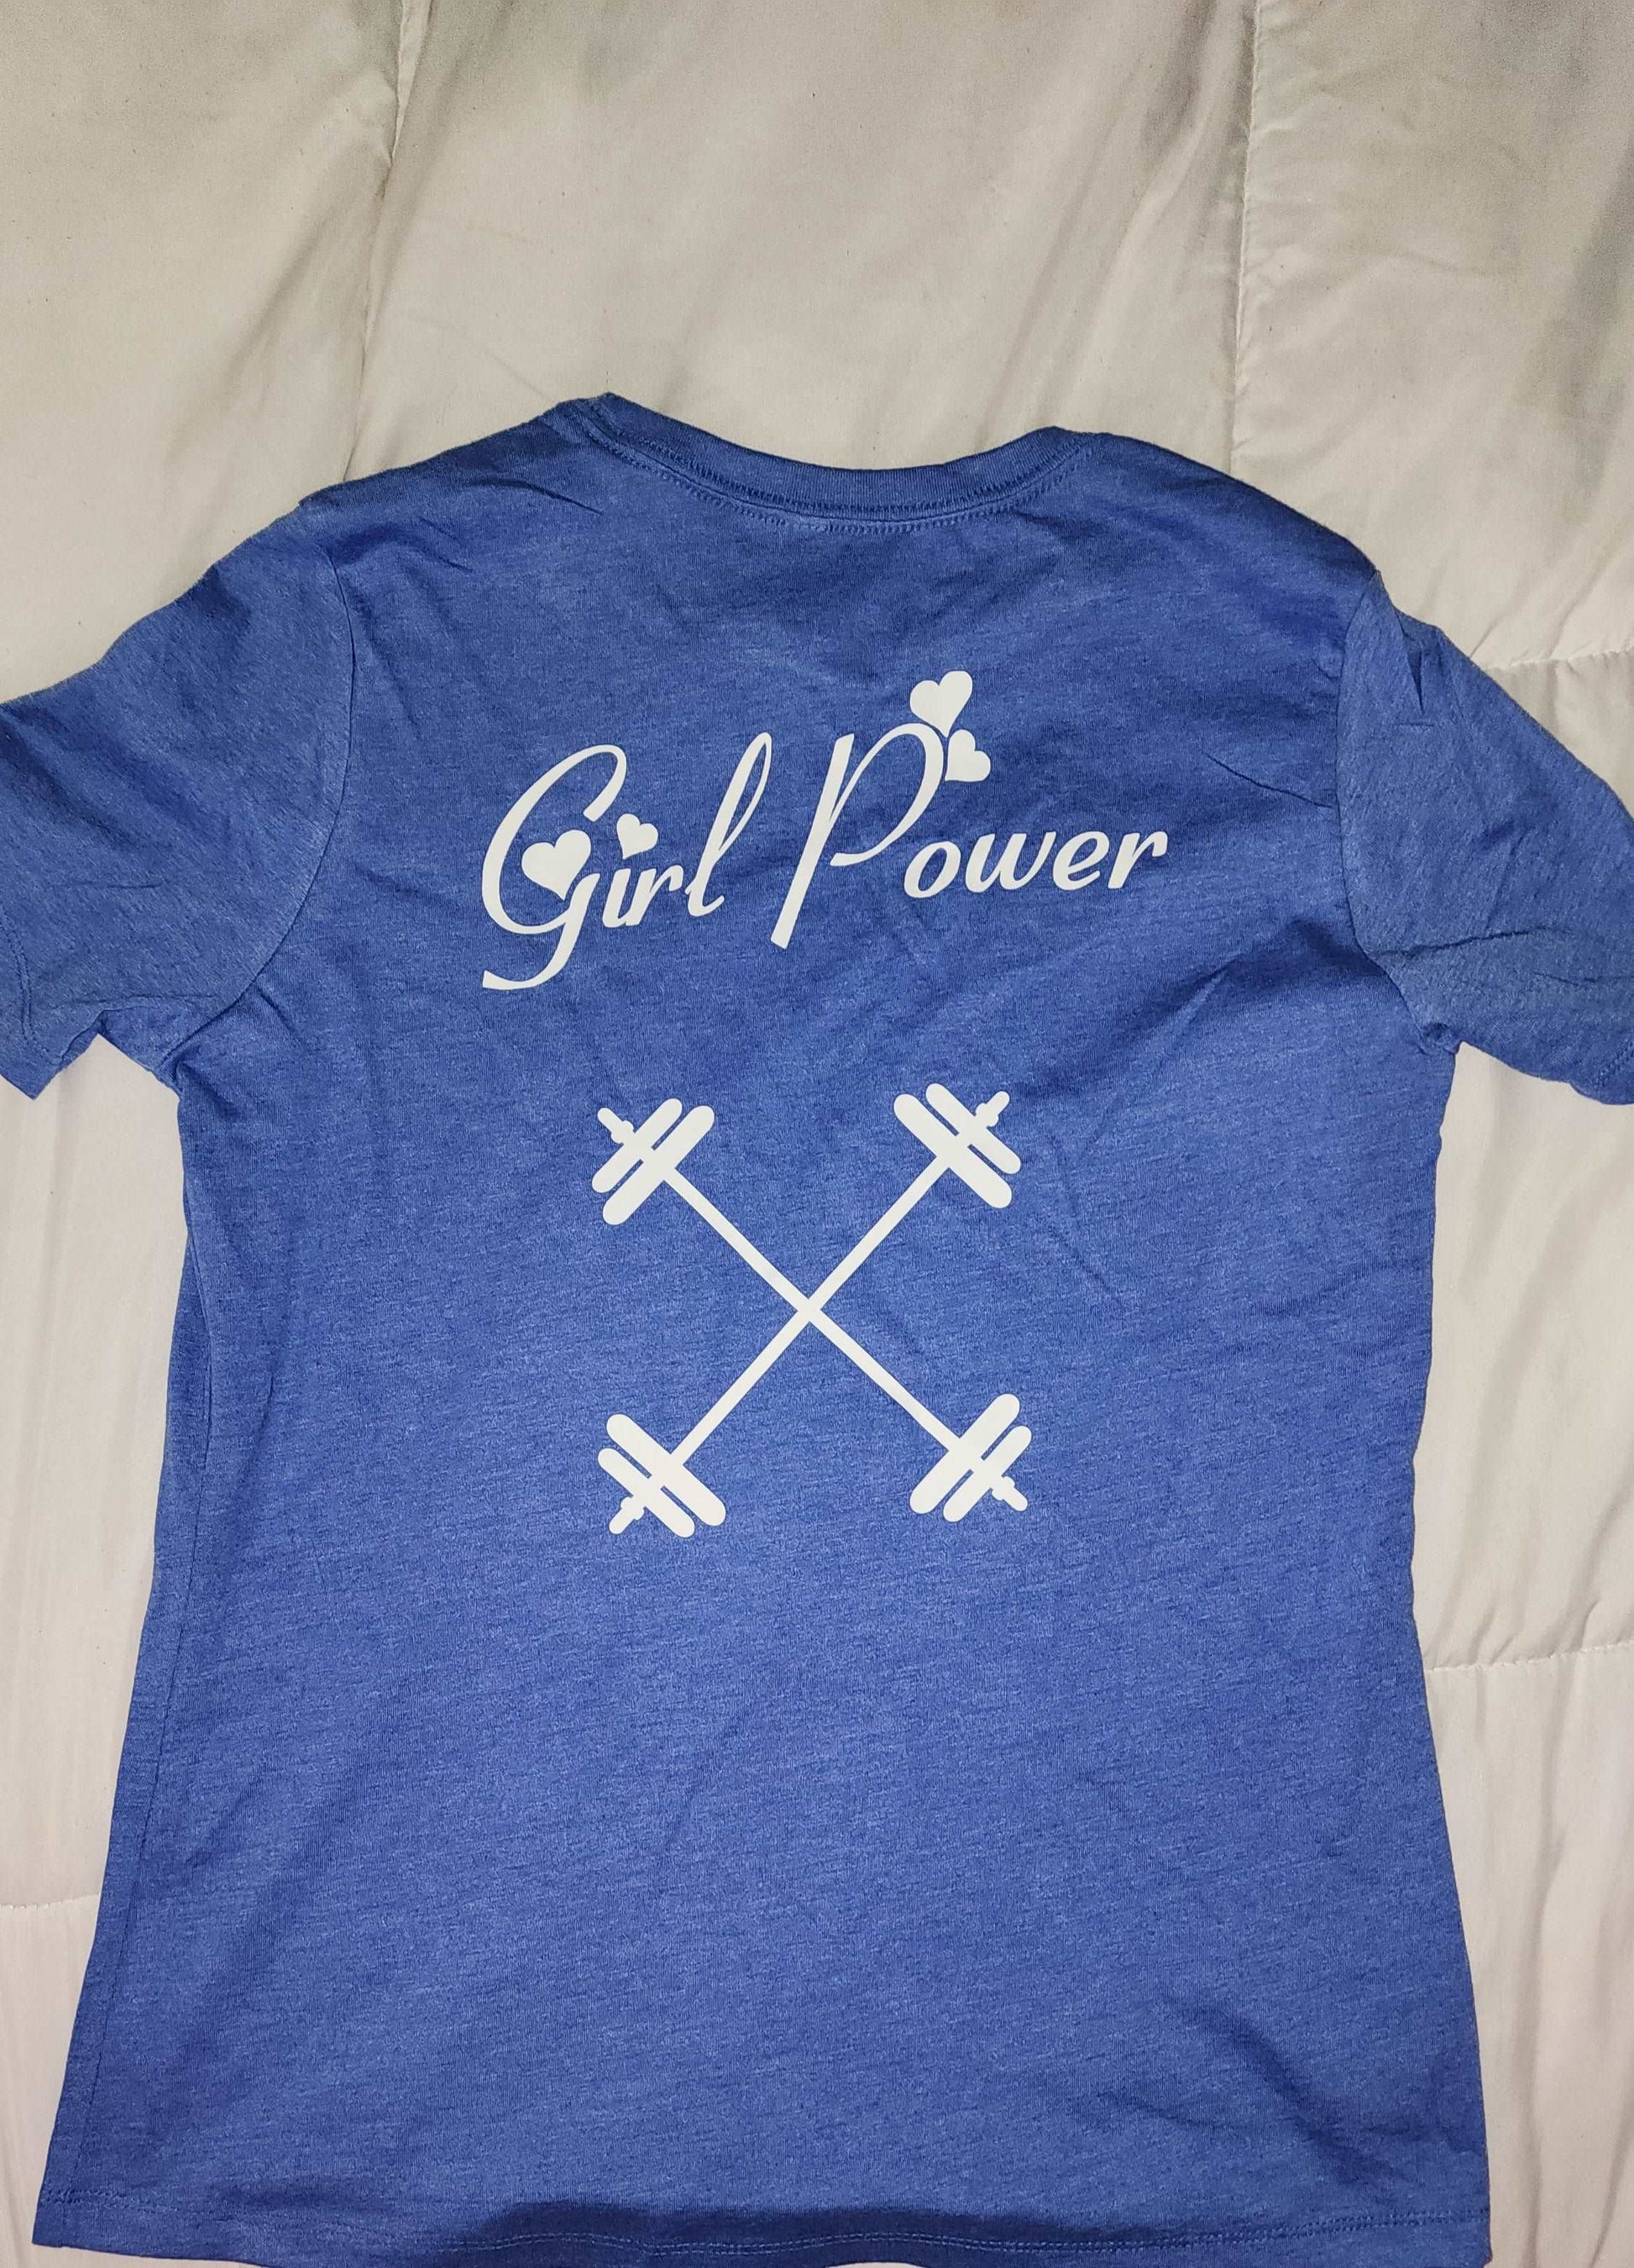 Strongbox Apparel's Prove Them Wrong women's tee